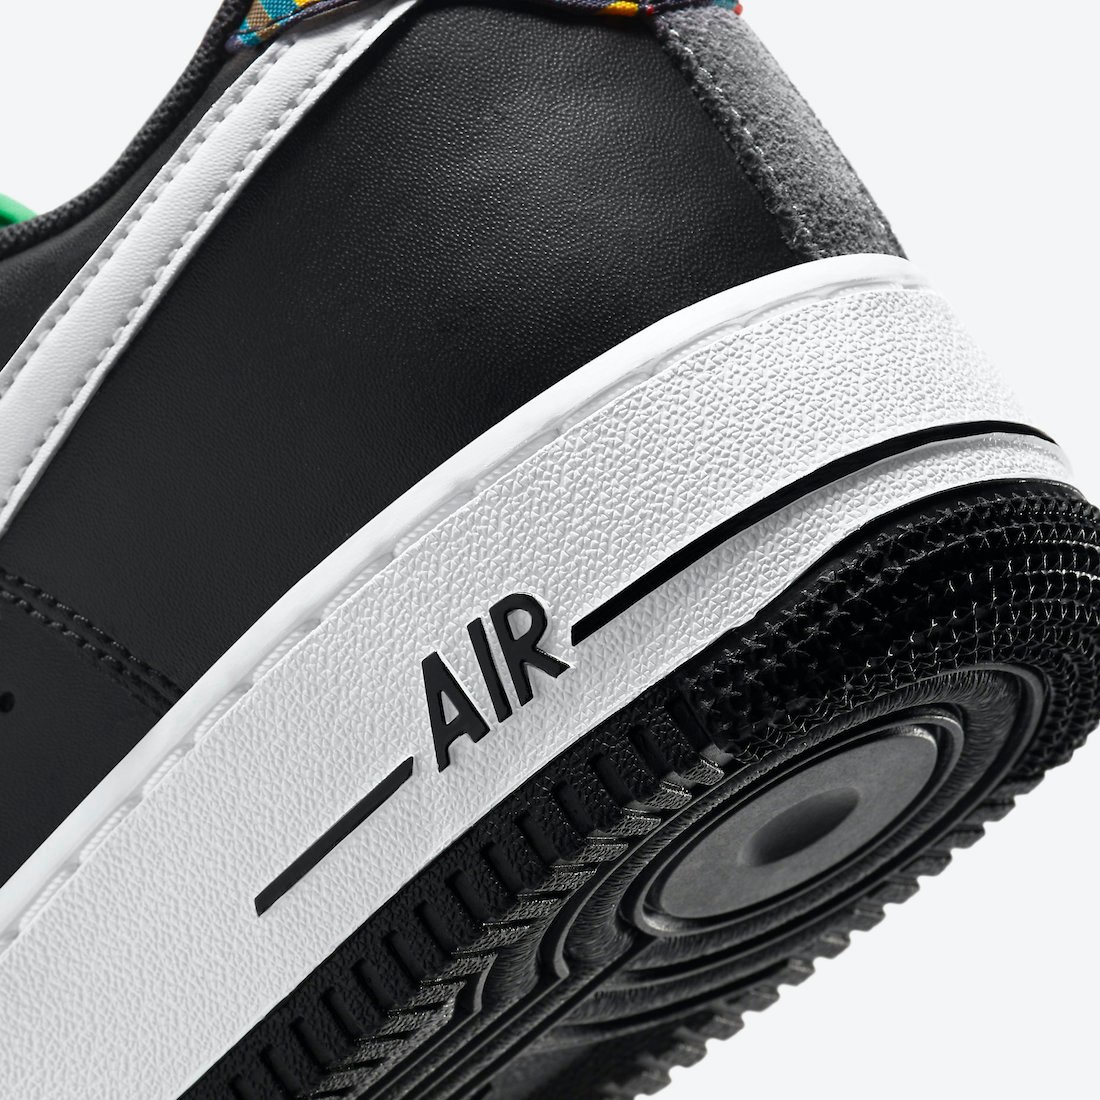 Nike Air Force 1 Live Together Play Together Urban Jungle Gym DC1483-001 Release Date Info